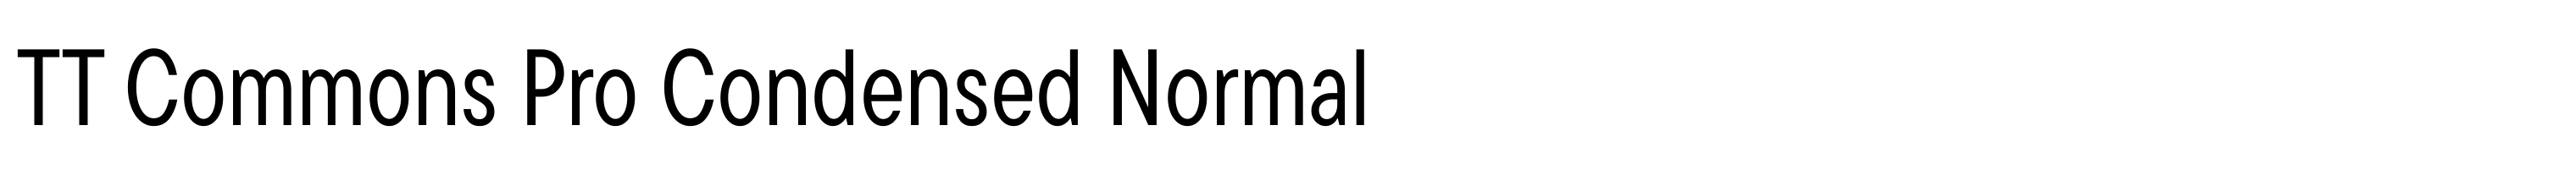 TT Commons Pro Condensed Normal